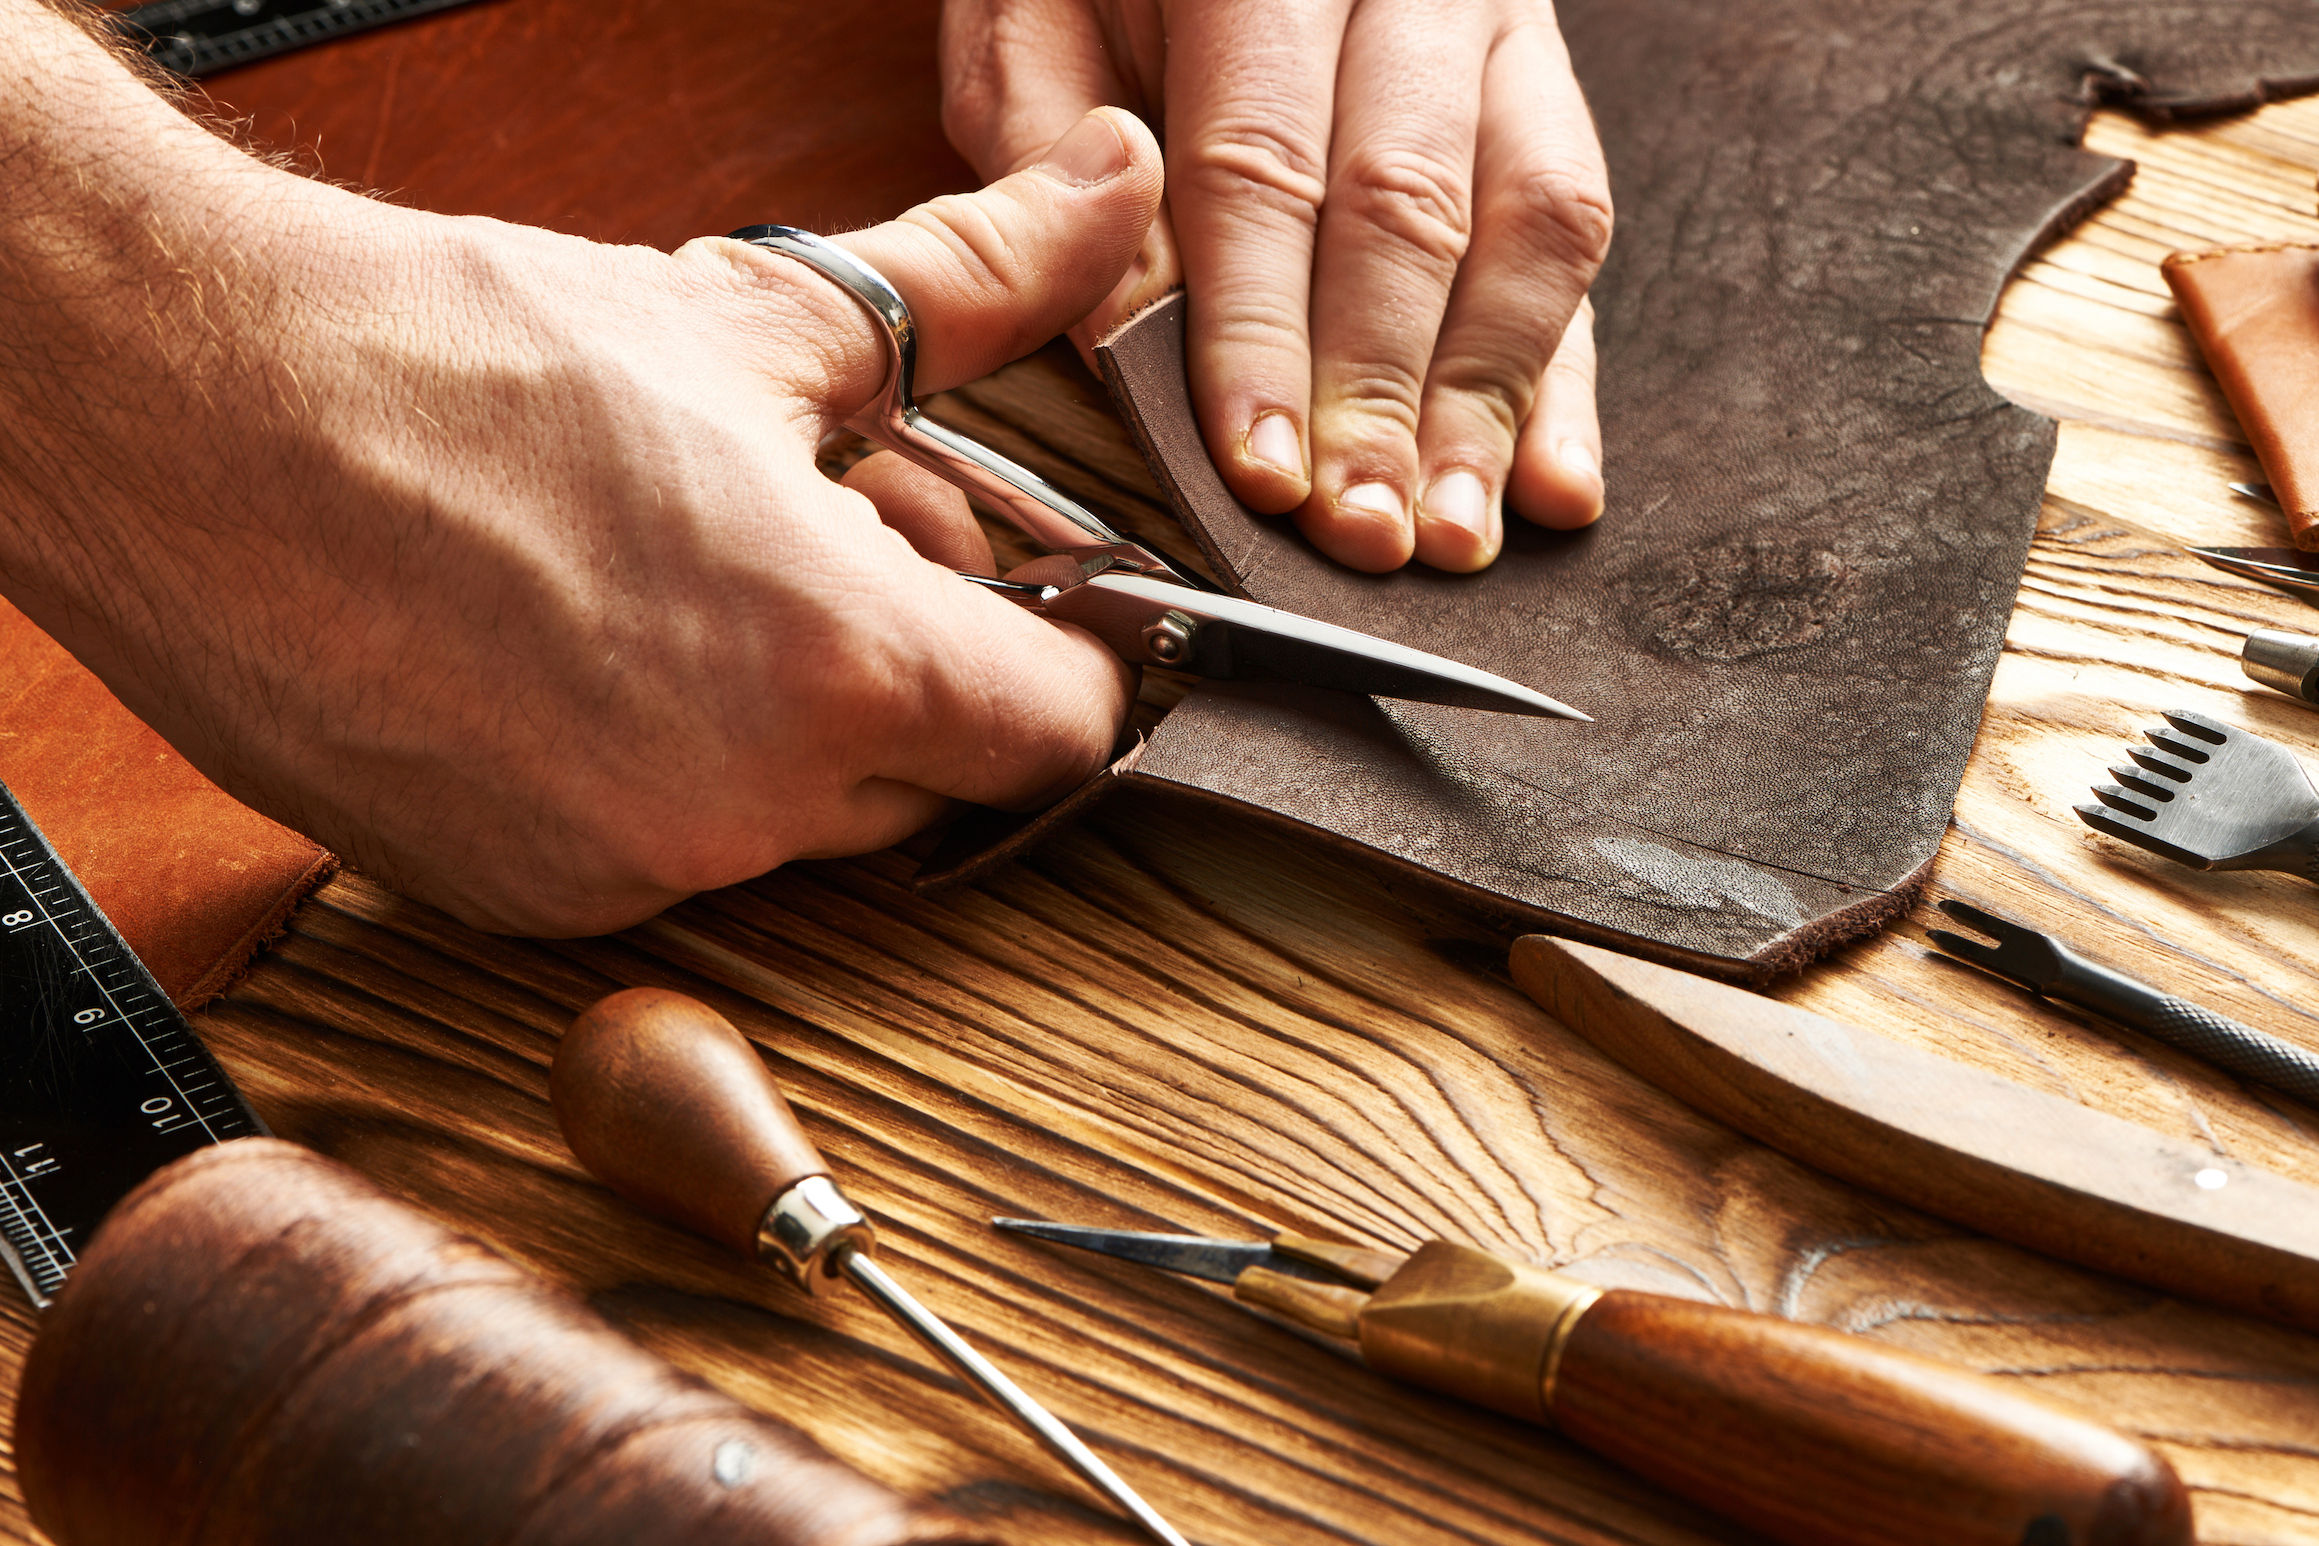 5 leather crafting workshops to hone your craftsmanship